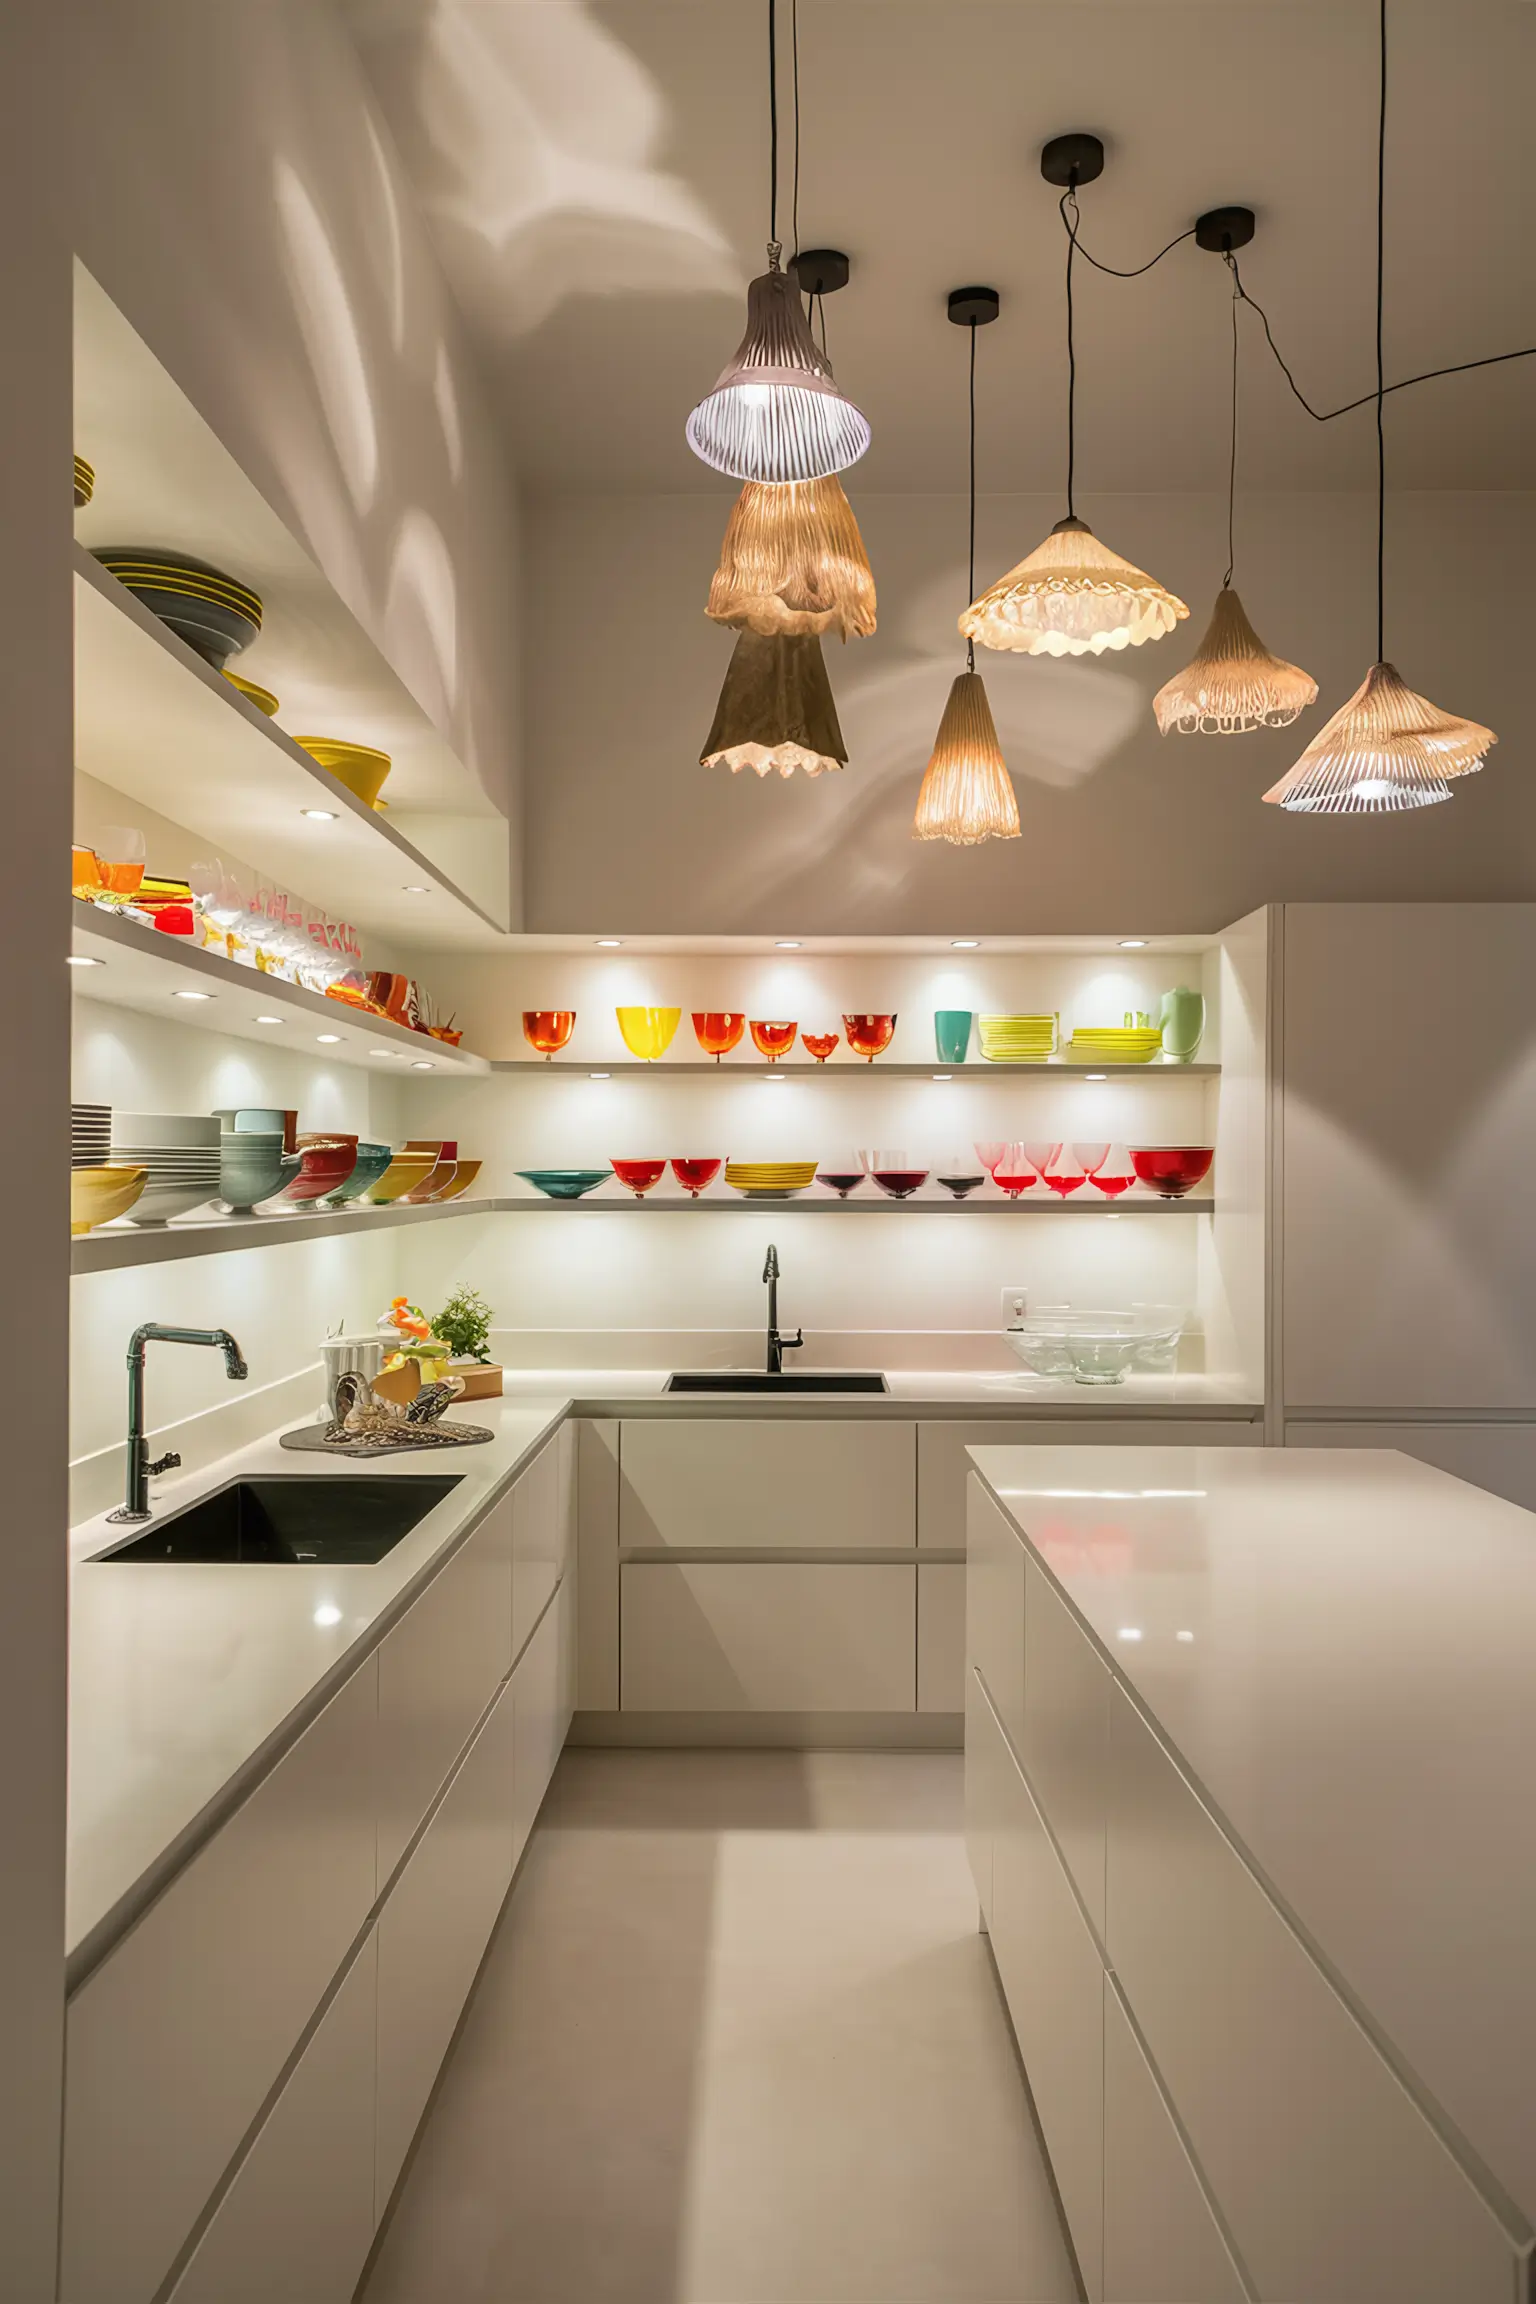 Minimalistic kitchen with creative makeover ideas like open shelving and colorful accents.